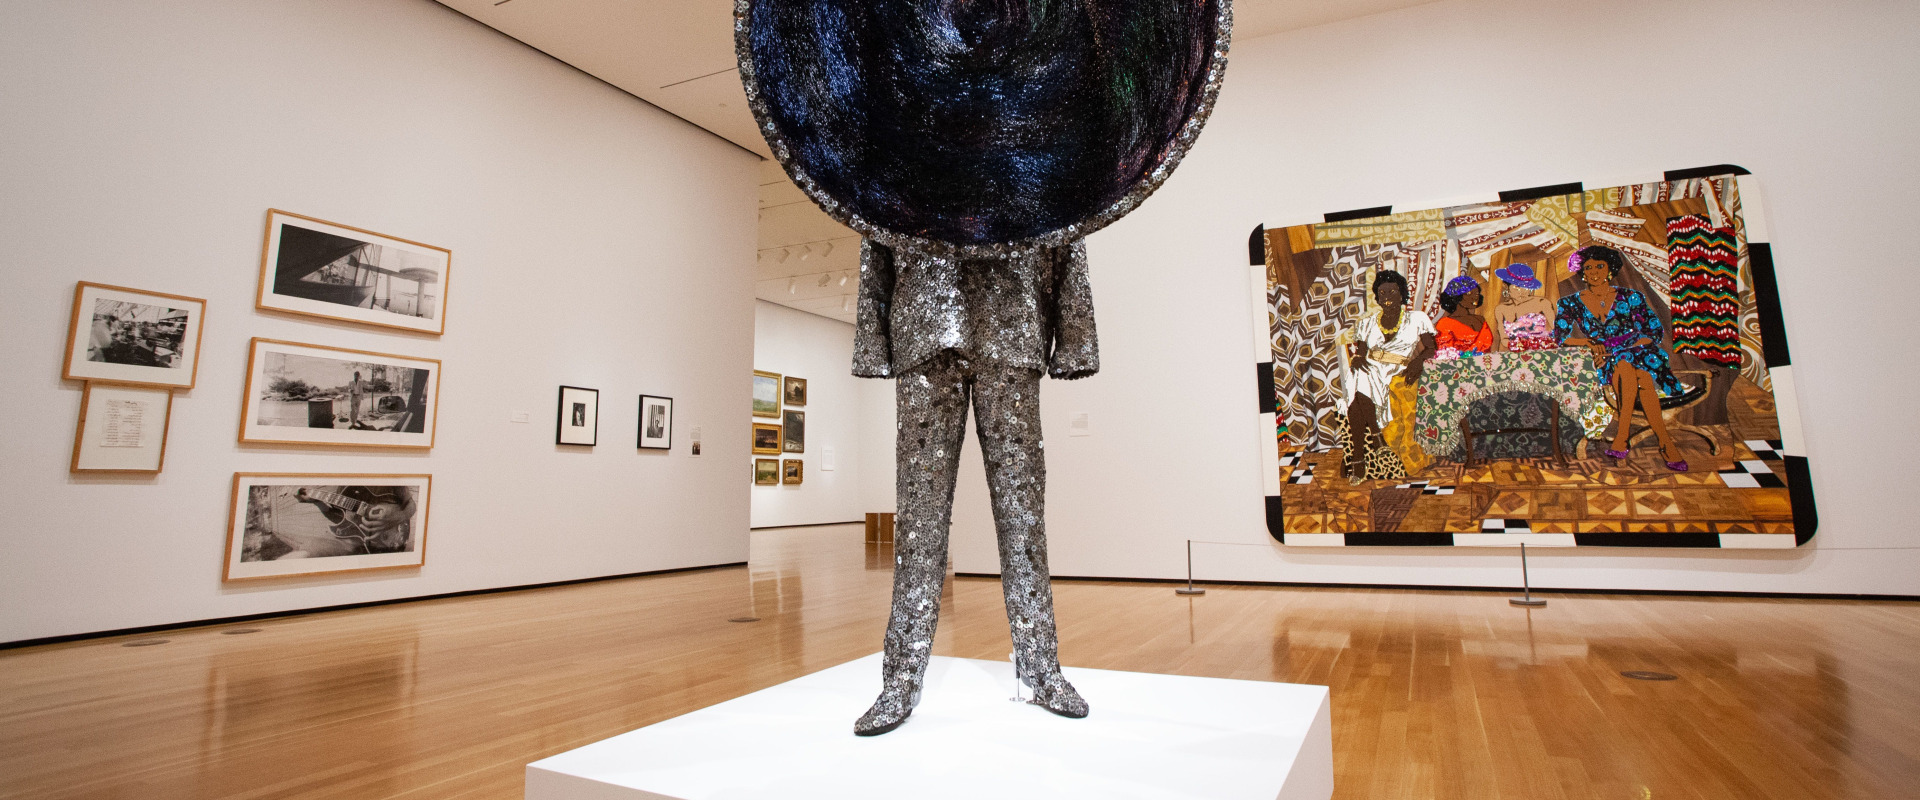 The Best Time to Explore Art Museums in Akron, Ohio